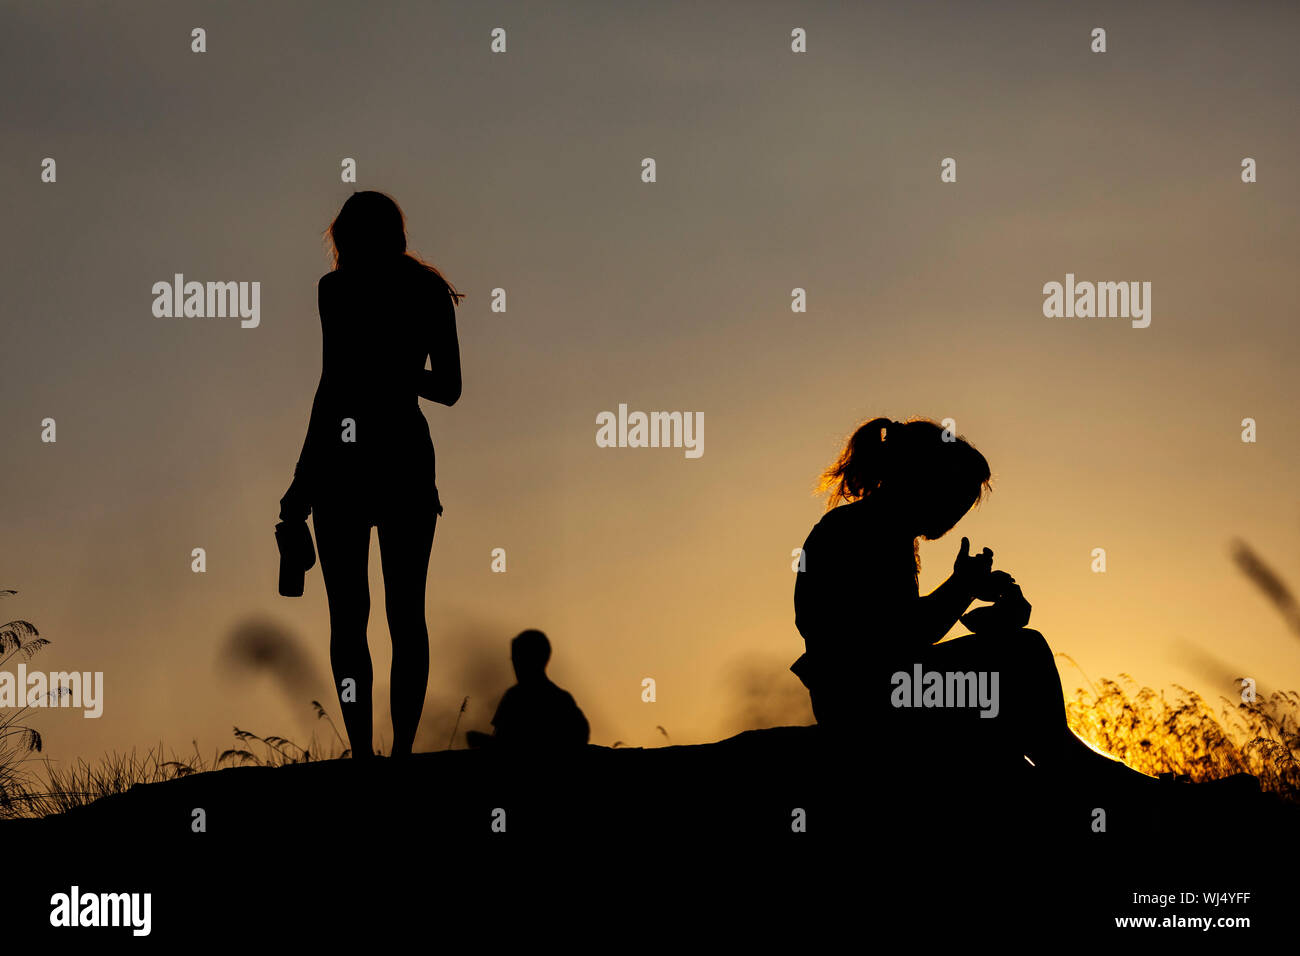 Silhouette women eating and drinking on hill at sunset Stock Photo